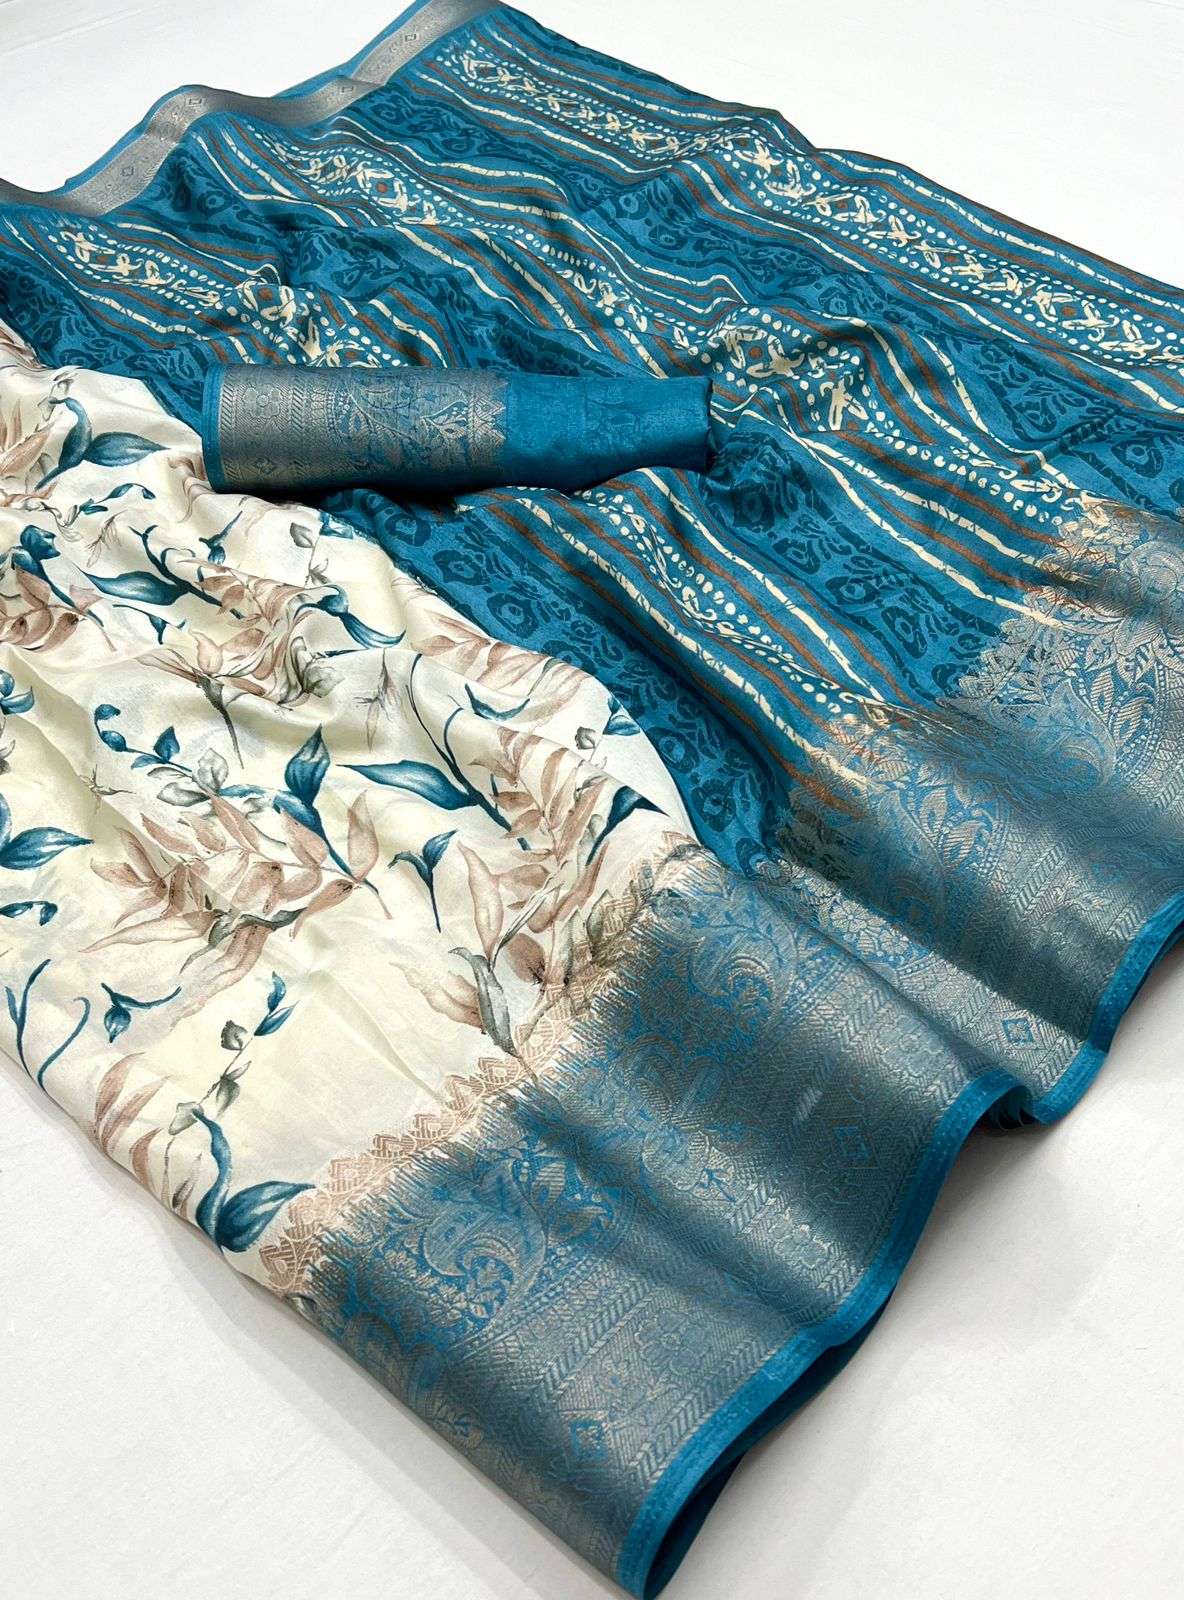 Latest Festival Special Dola SIlk with Jacquard Weaving Bord...